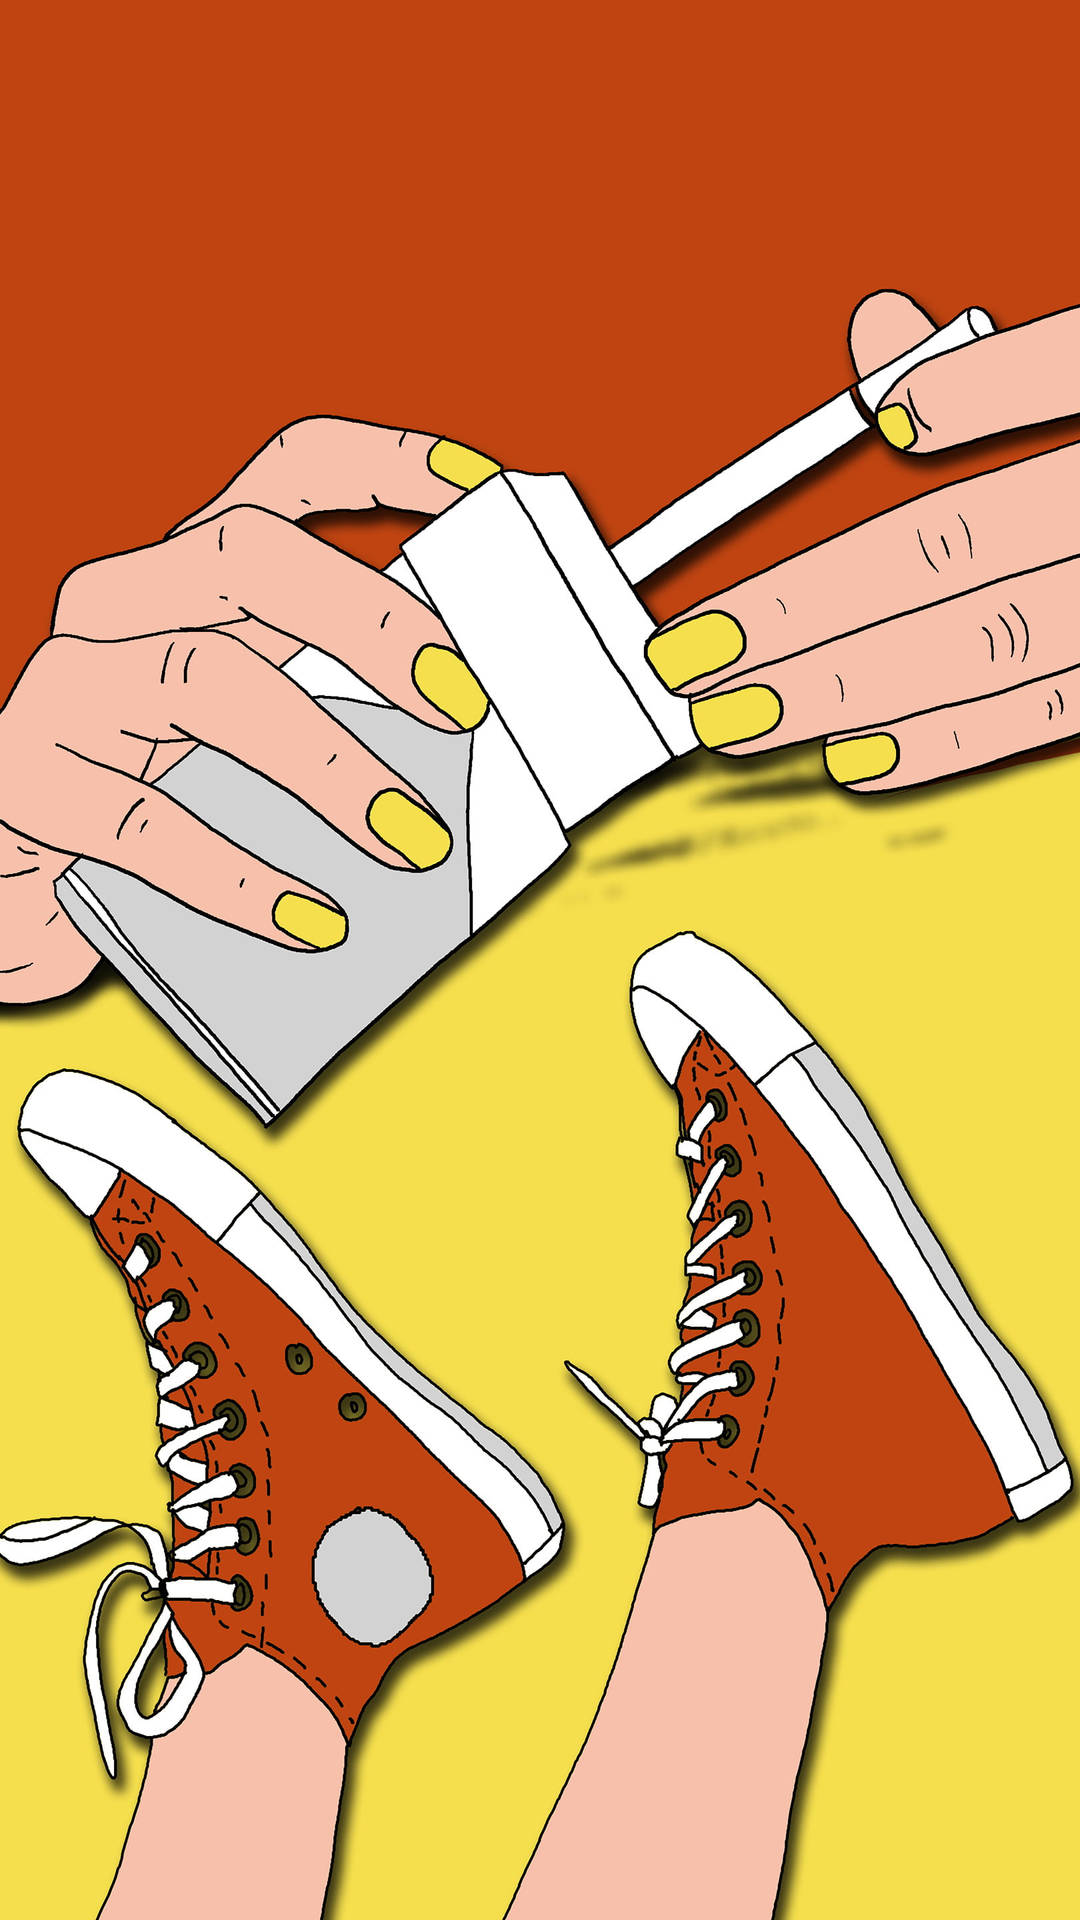 Sneakers And Cigarette 70s Retro Aesthetic Background